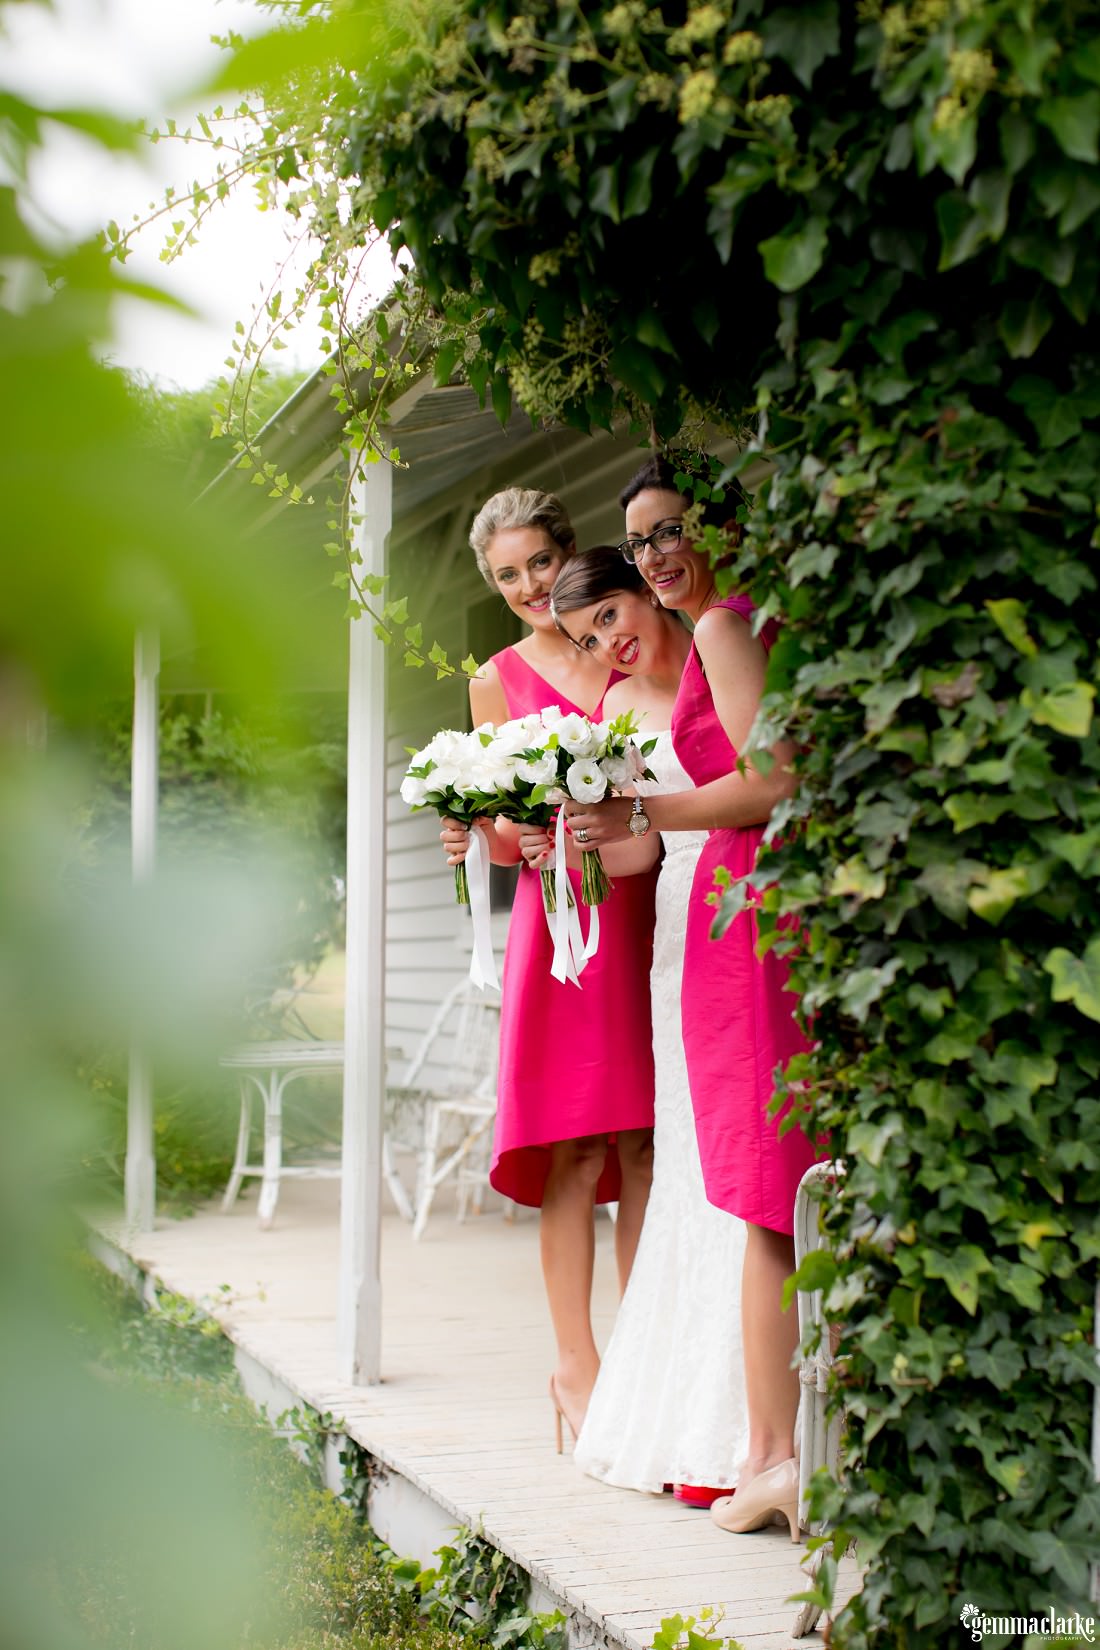 A bride and her bridesmaids standing on a verandah looking out from around a tree